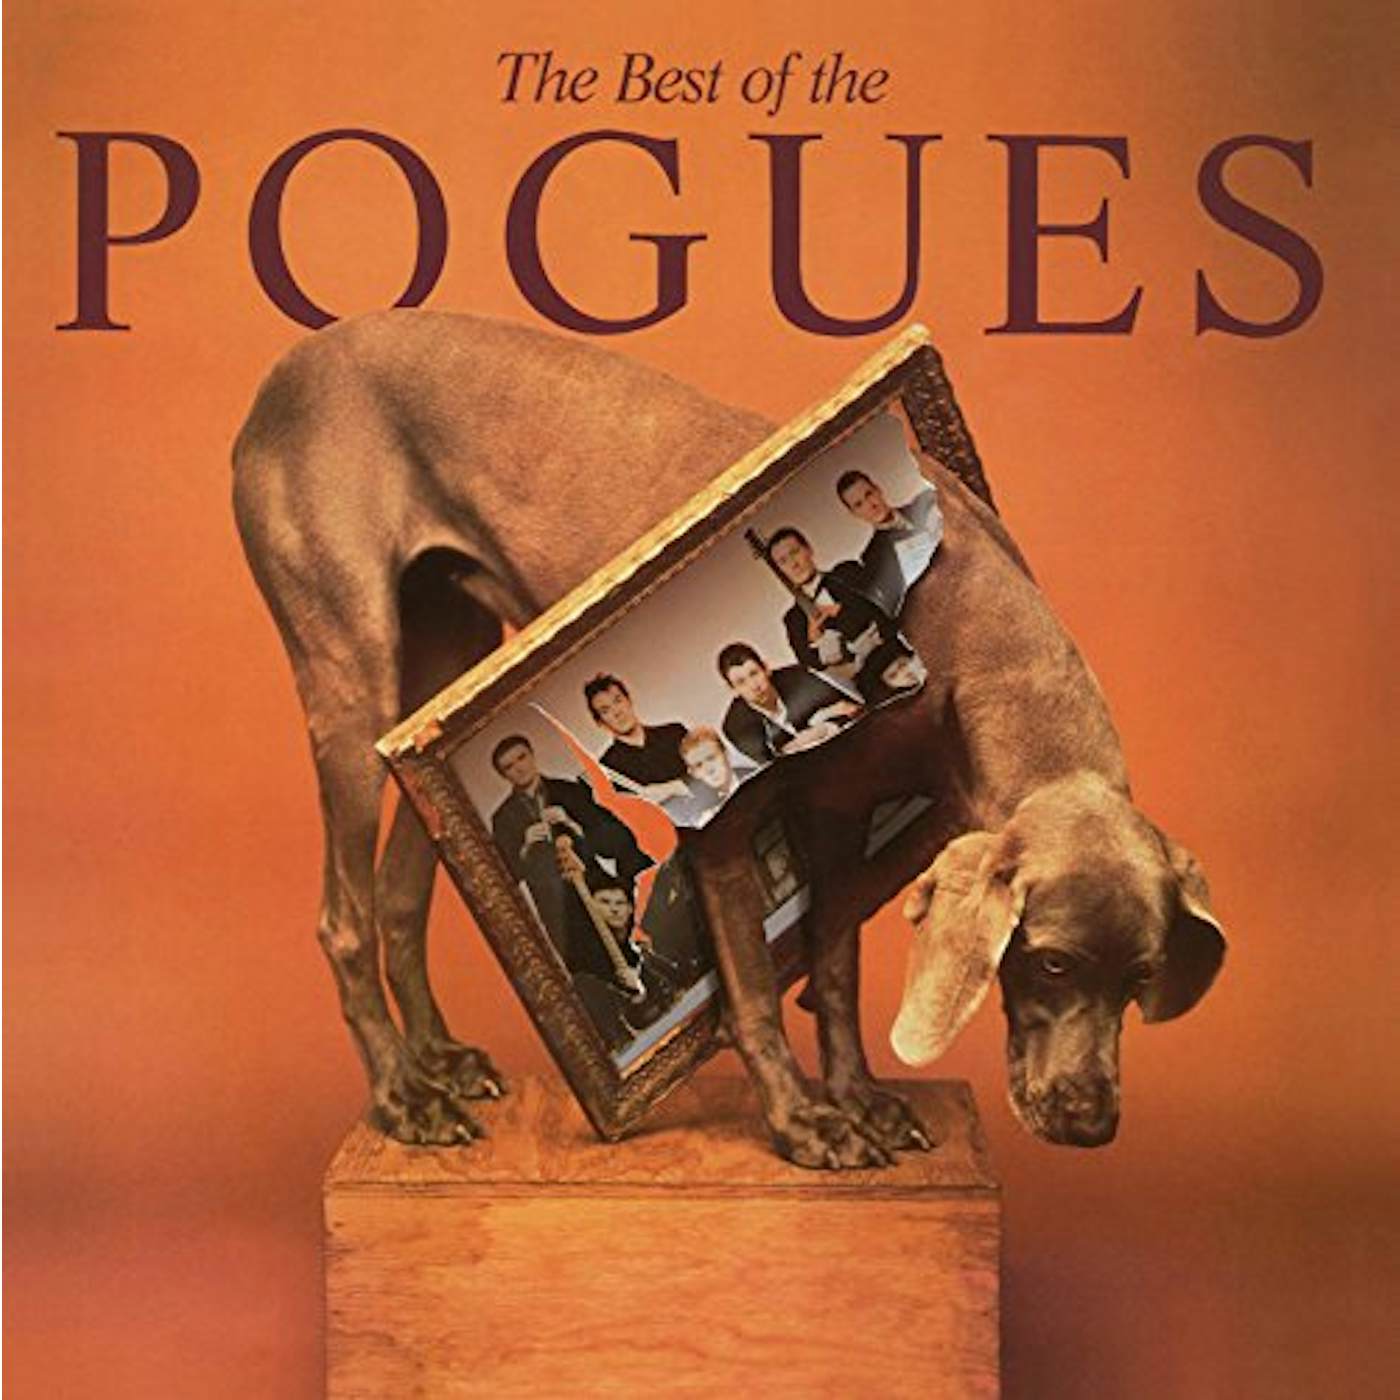 BEST OF THE POGUES Vinyl Record